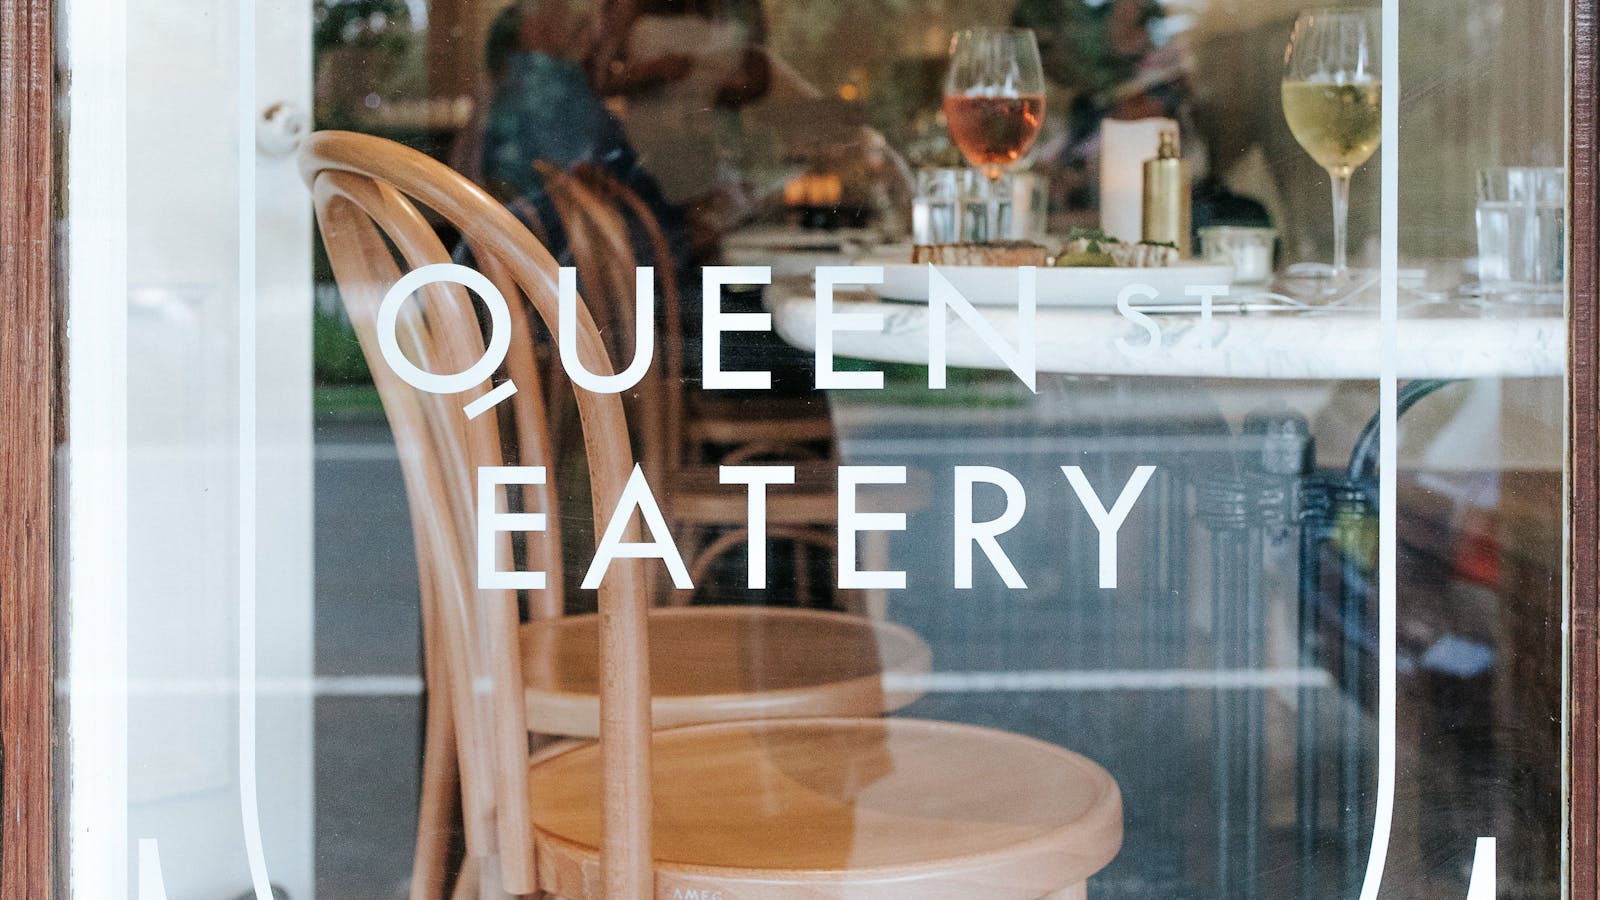 Welcome to Queen Street Eatery